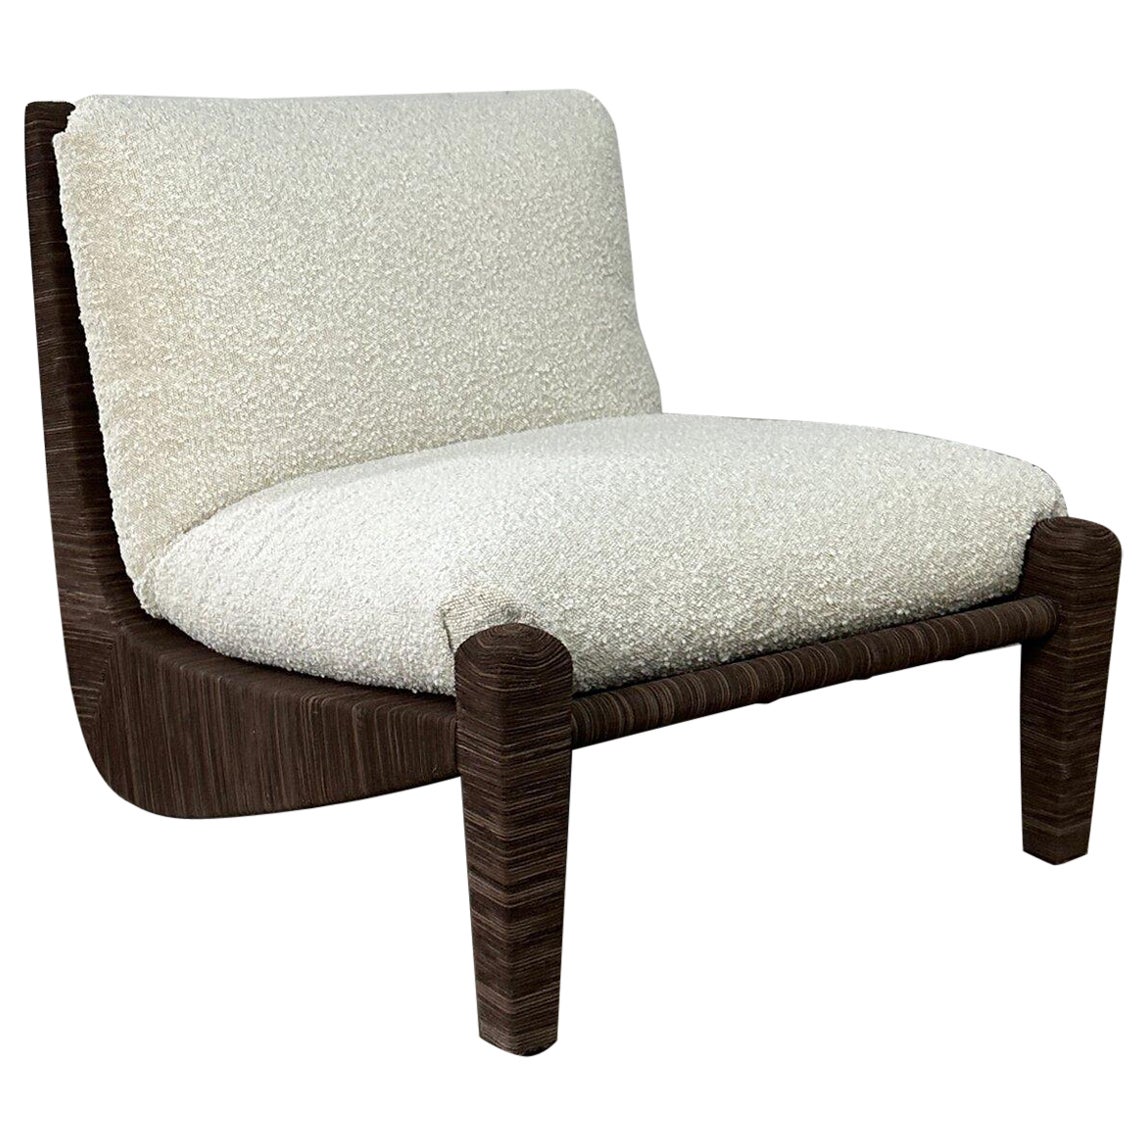 Lashed lounge chair by Baker Furniture For Sale